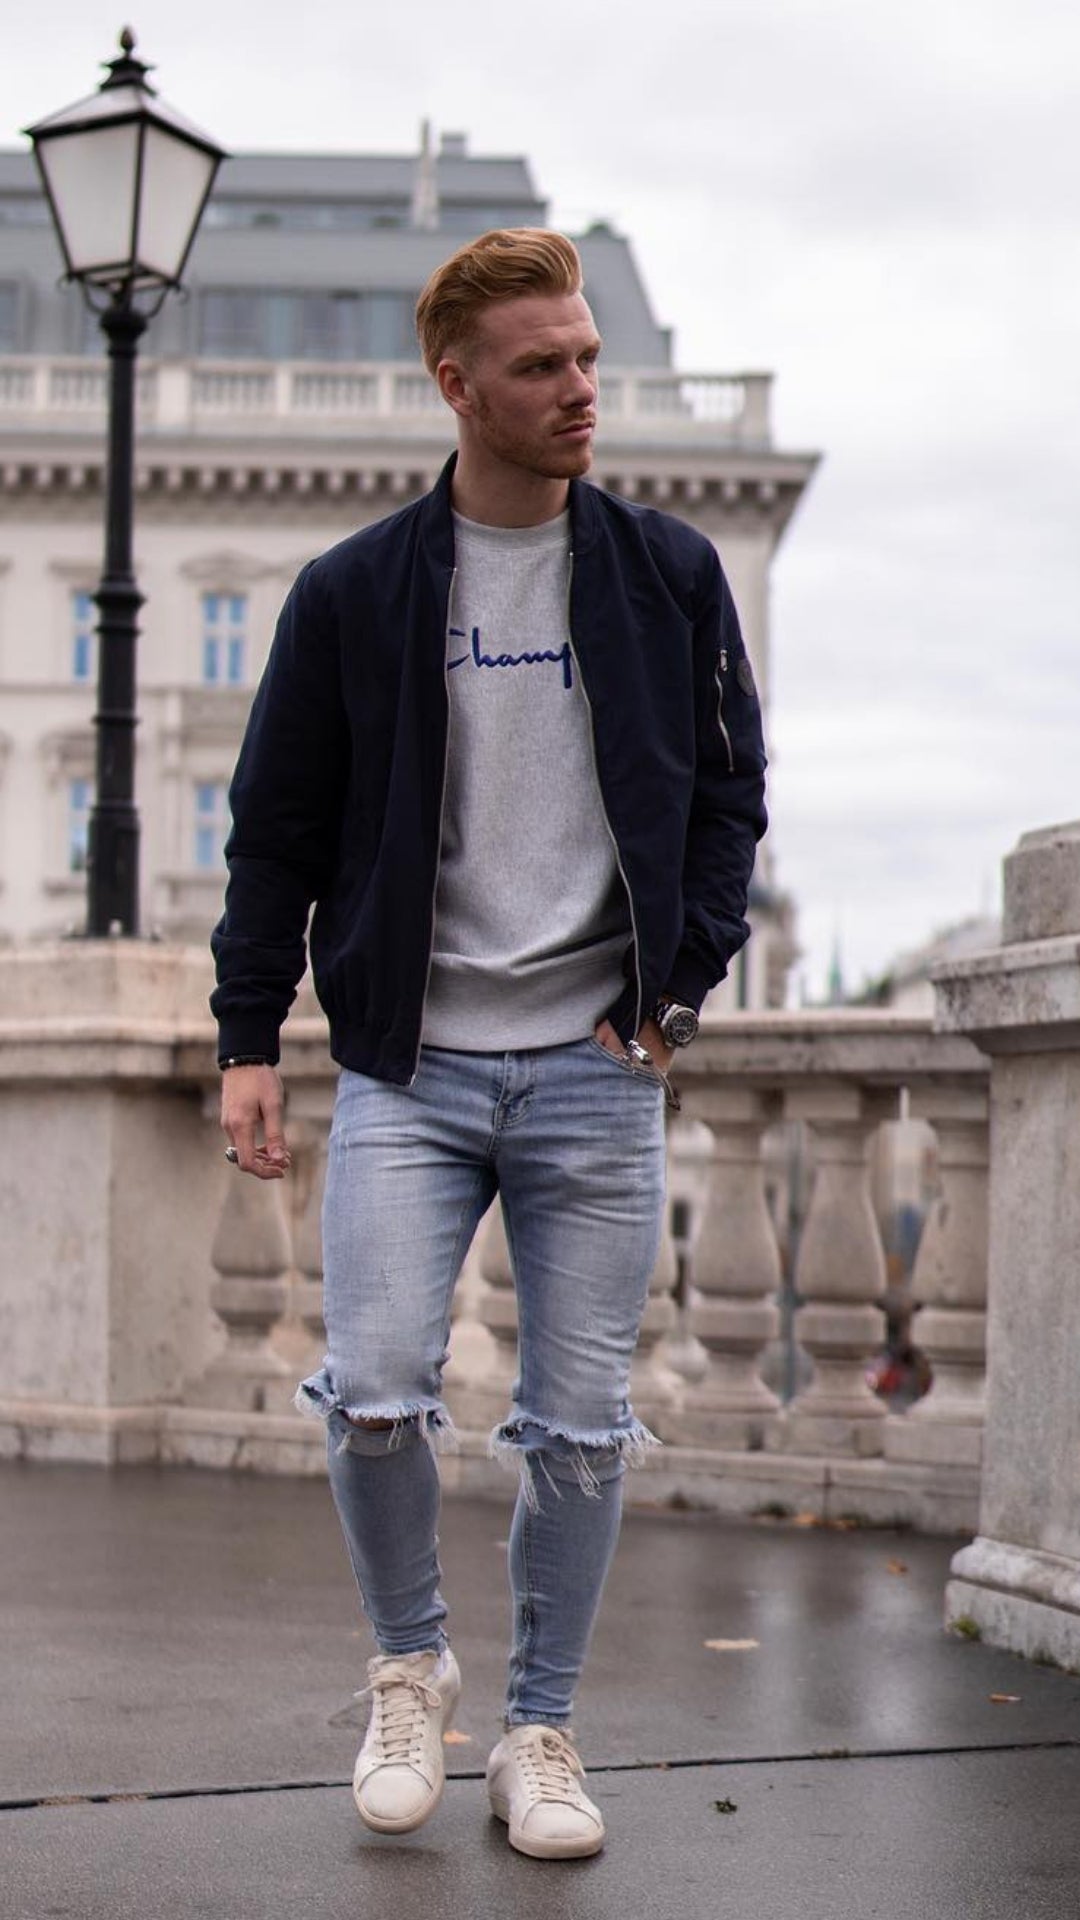 5 Bomber Jacket Outfits To Wear Every Fall Weekends #bomber #jacket #outfits #mens #fashion #street #style